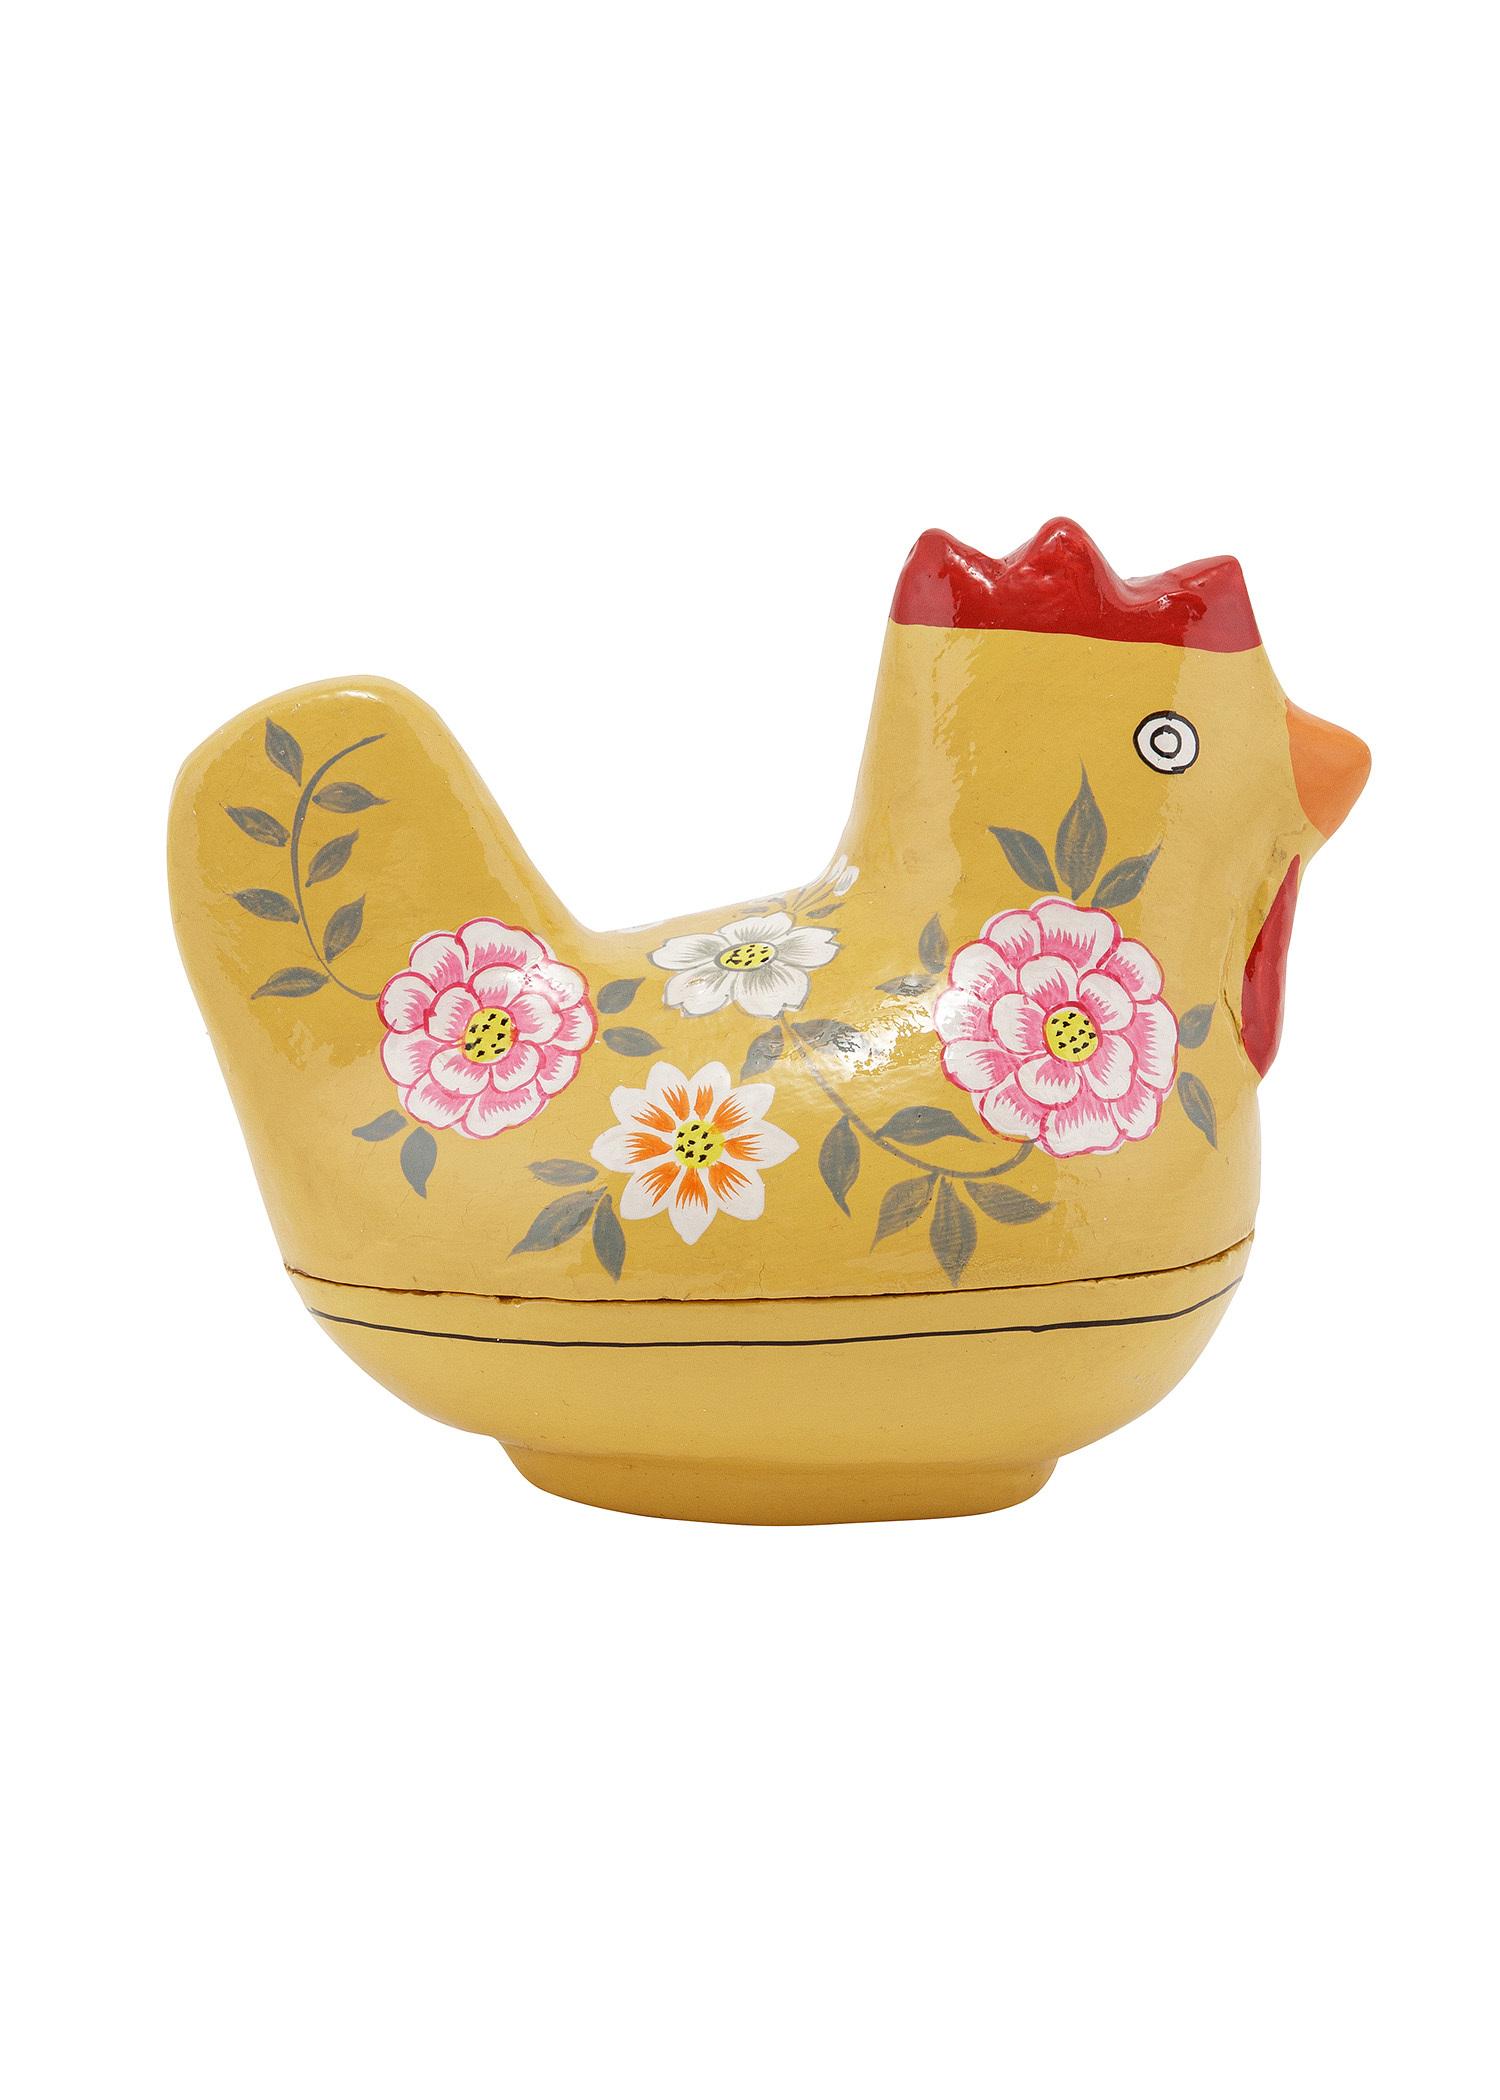 Easter chick shaped box Image 0